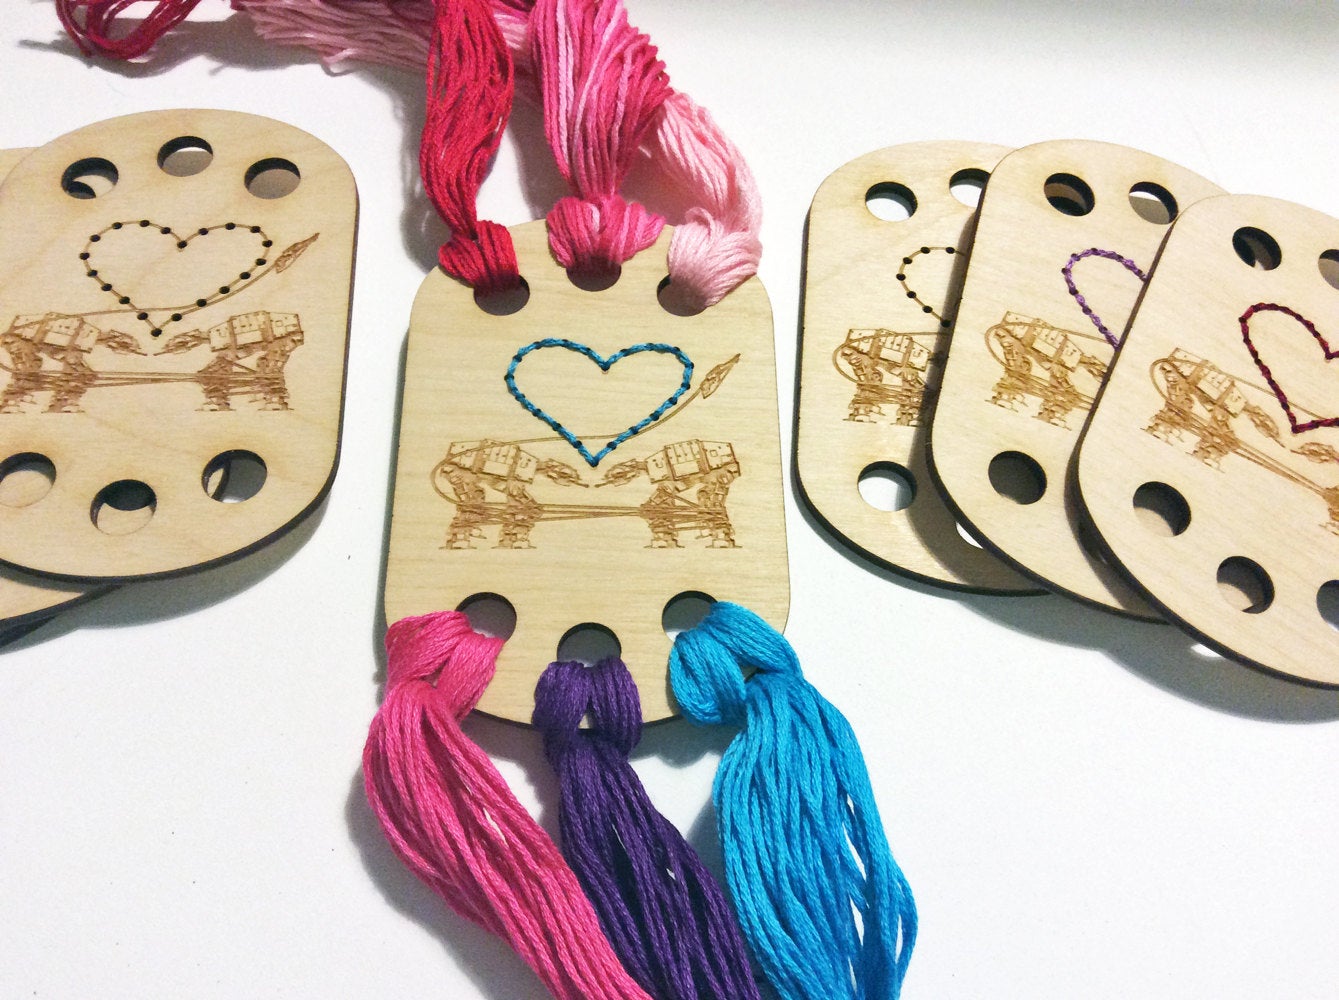 Craft Supply: Embroidery Floss Organizer - Love AT-AT First Sight